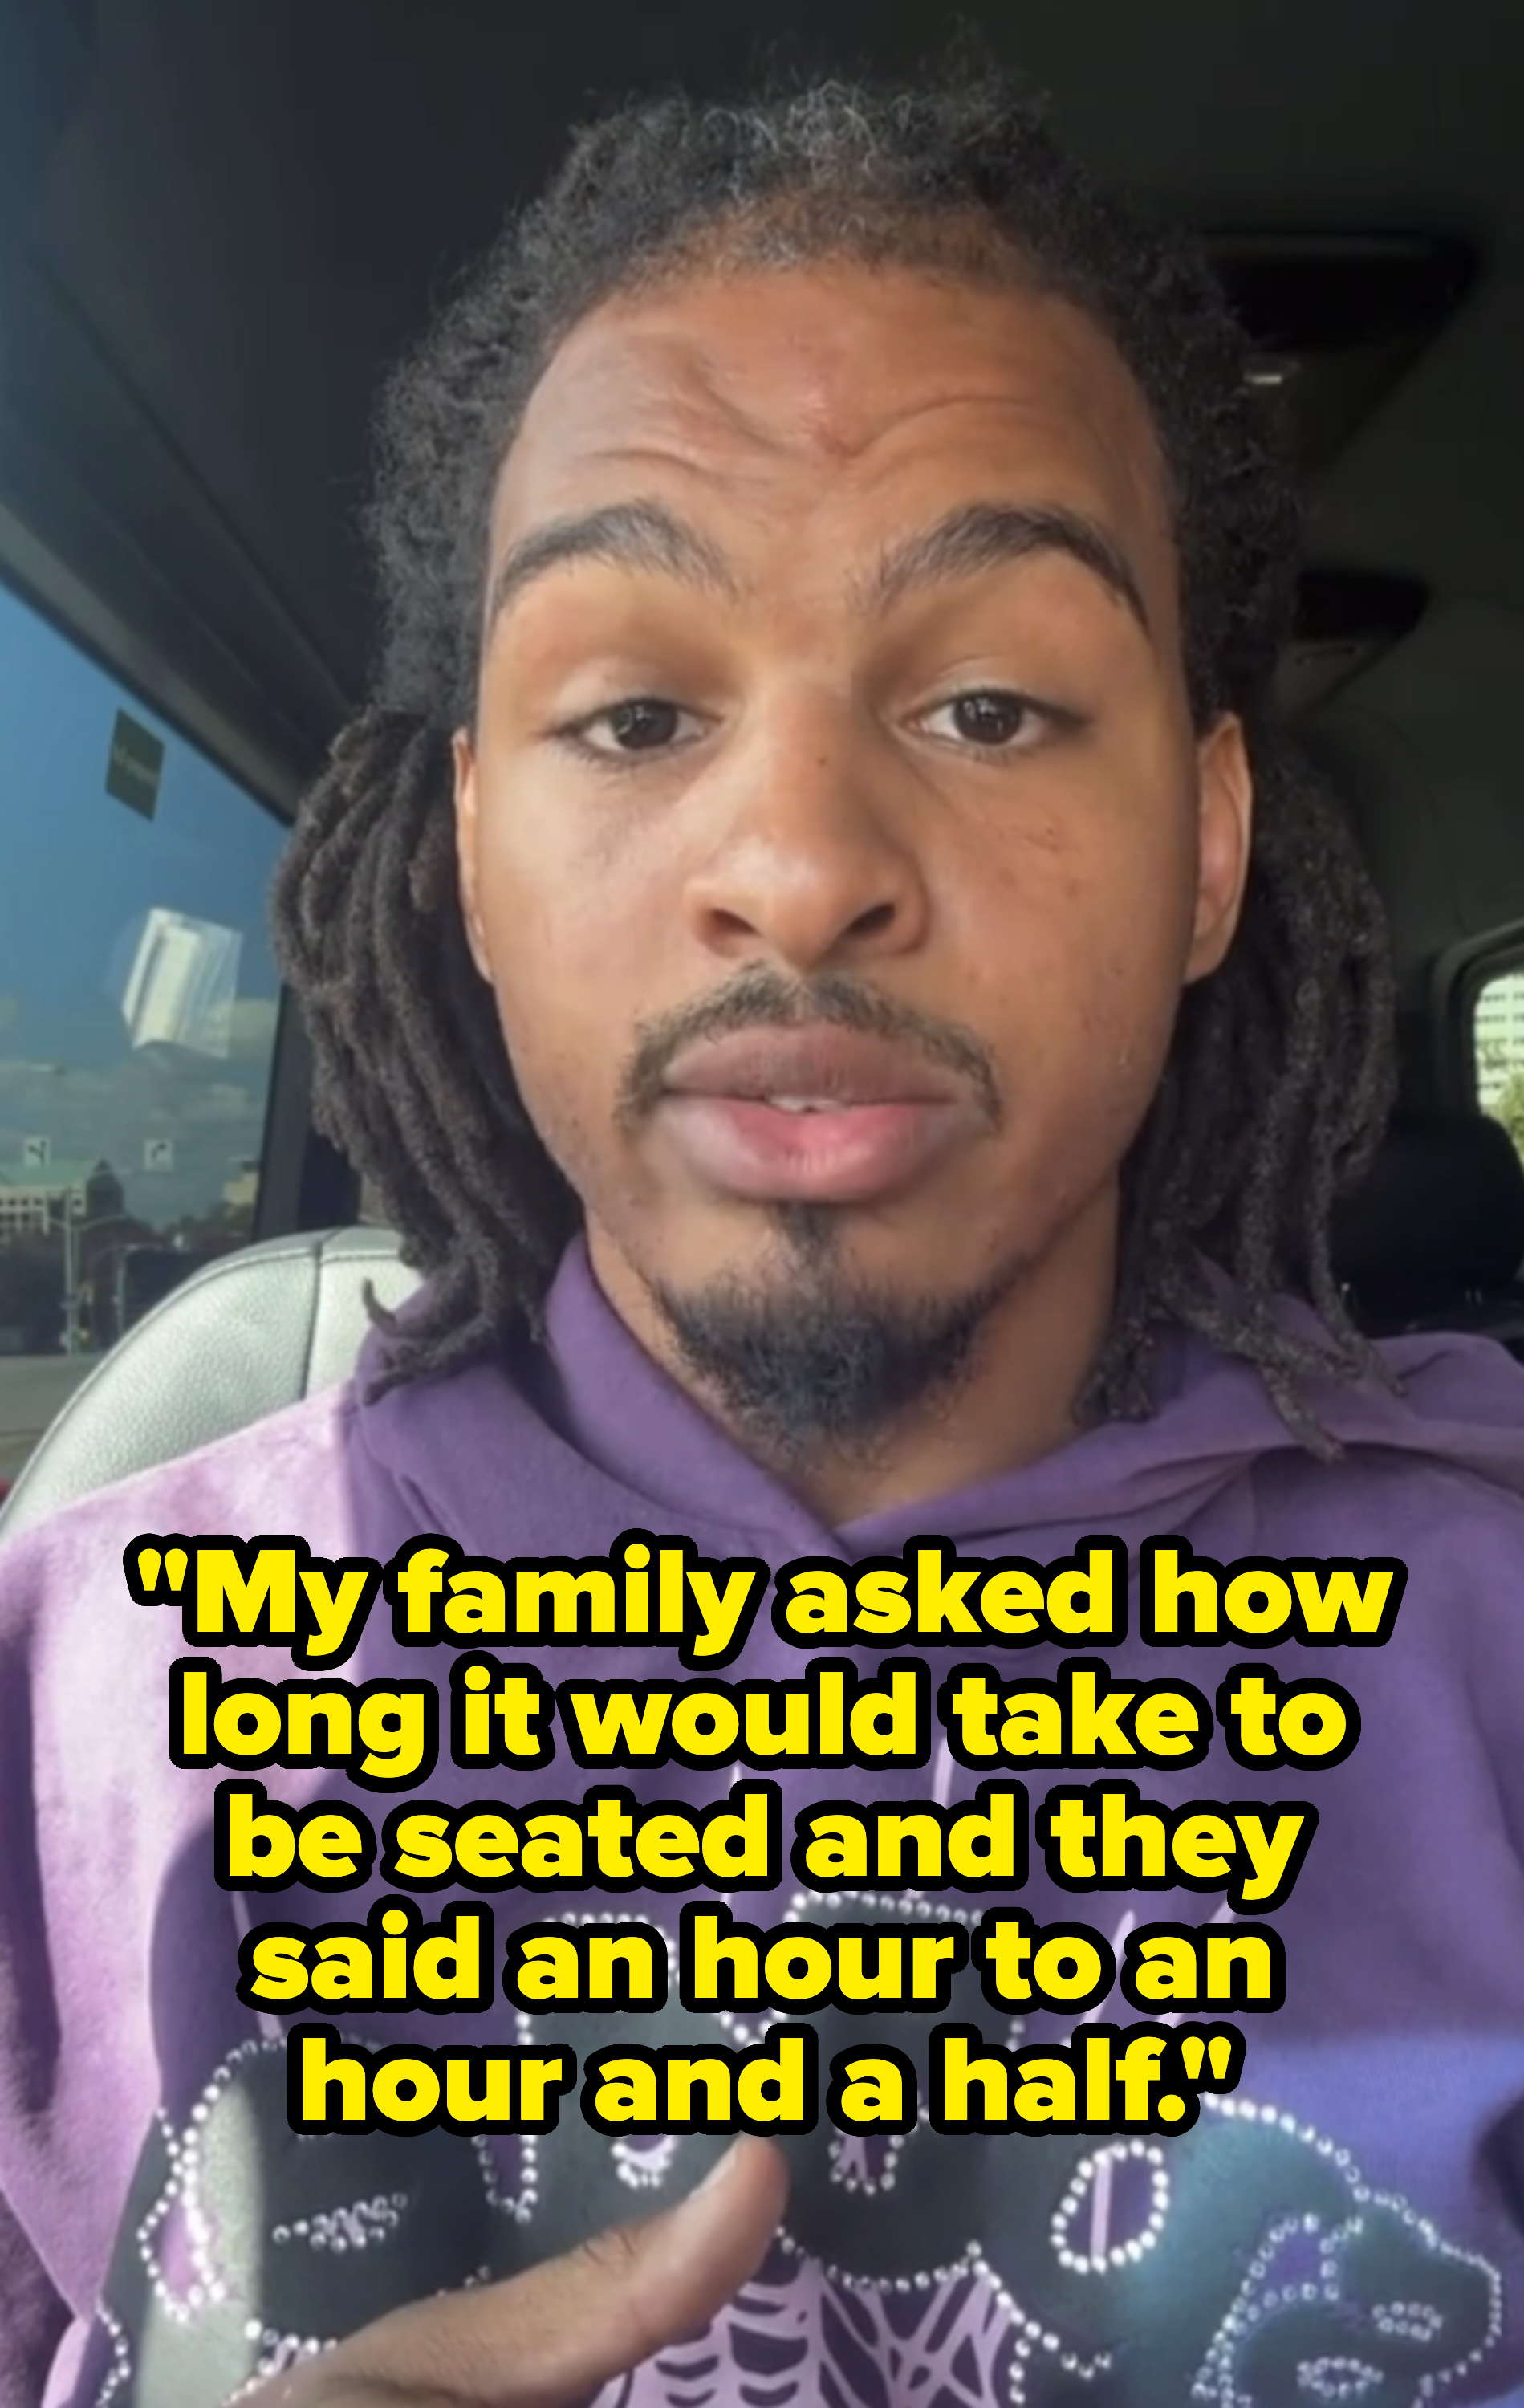 &quot;My family asked how long it would take to be seated and they said an hour to an hour and a half.&quot;